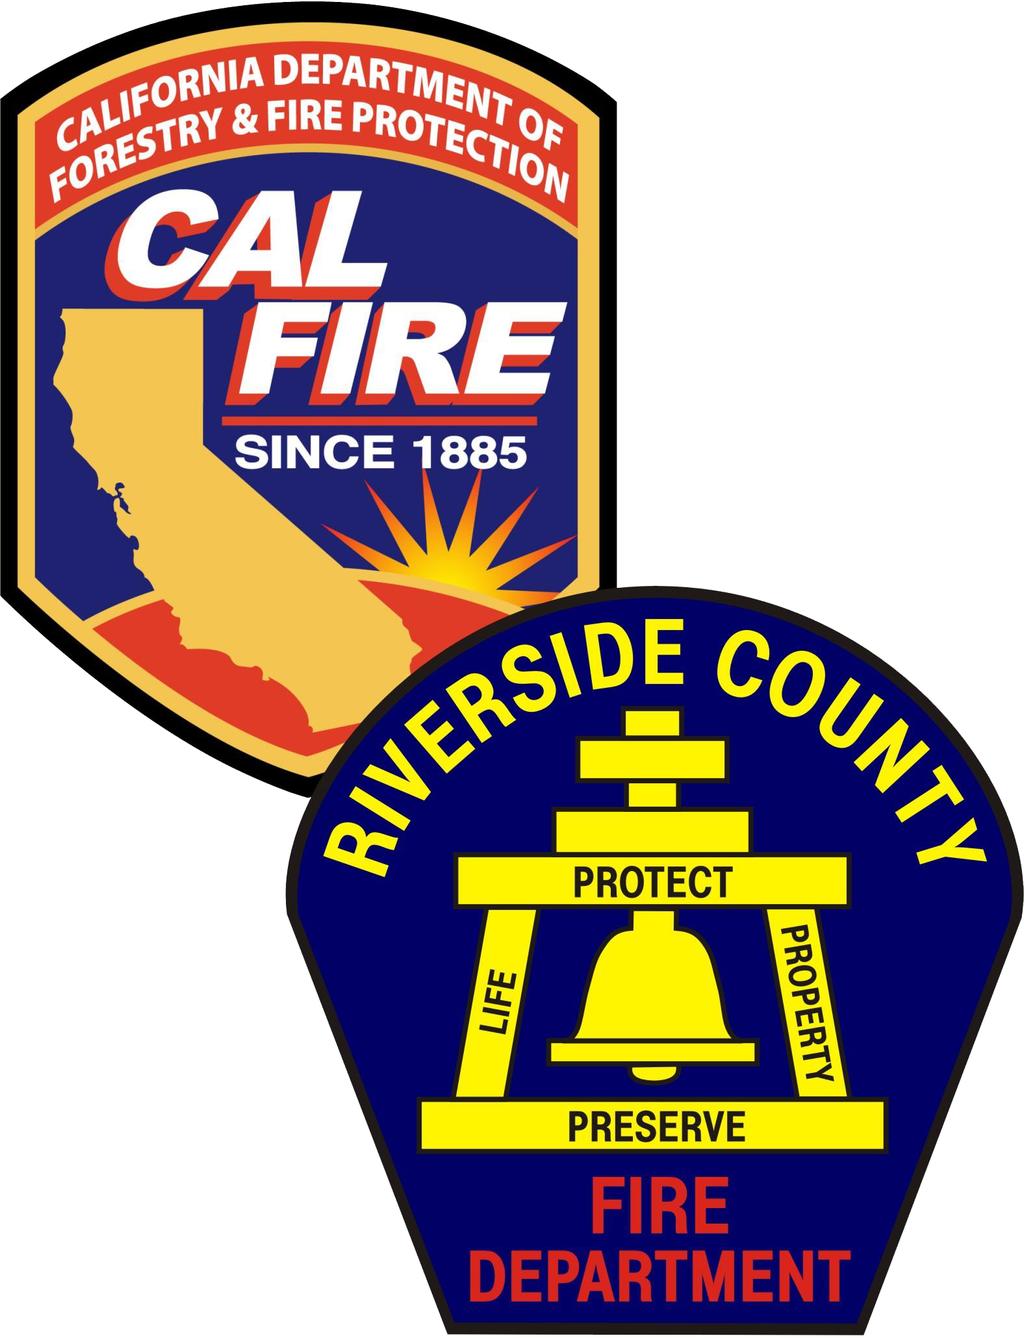 Riverside County Fire Department 16888 Bundy Ave Riverside Ca 92518 Dorm Registration Due to Riverside County Policy WE CAN NOT ACCEPT CASH Please make your check or money order payable to "Riverside